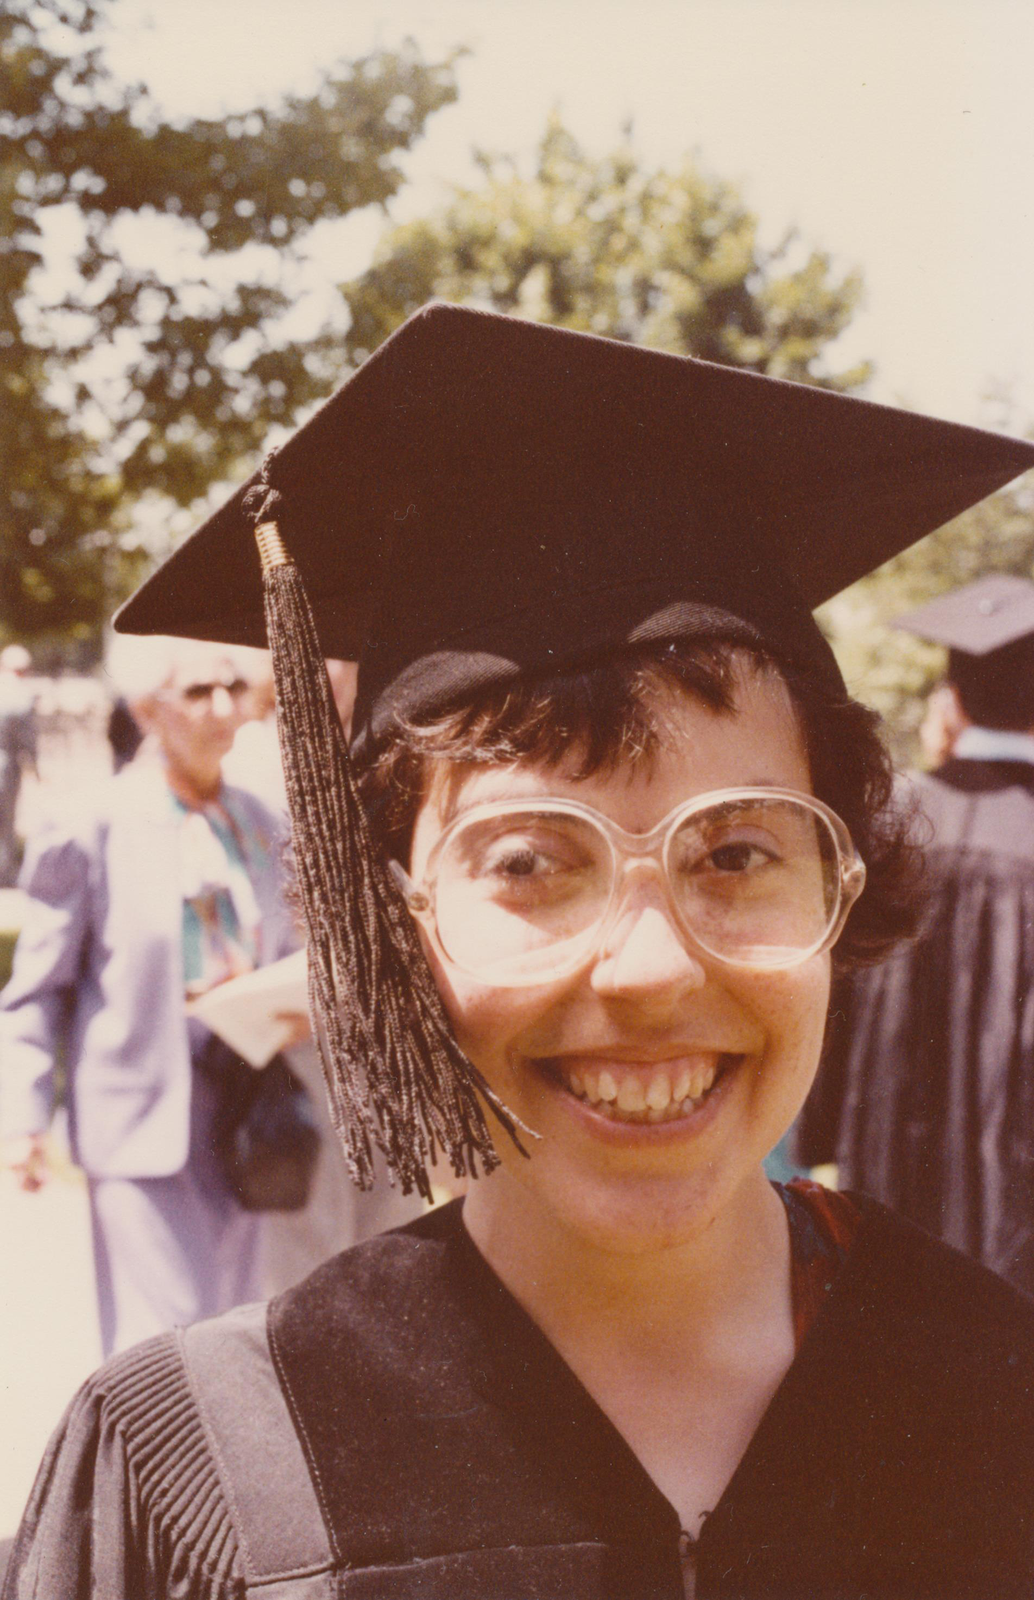 Janet at her graduation from Harvard Law School in 1983.